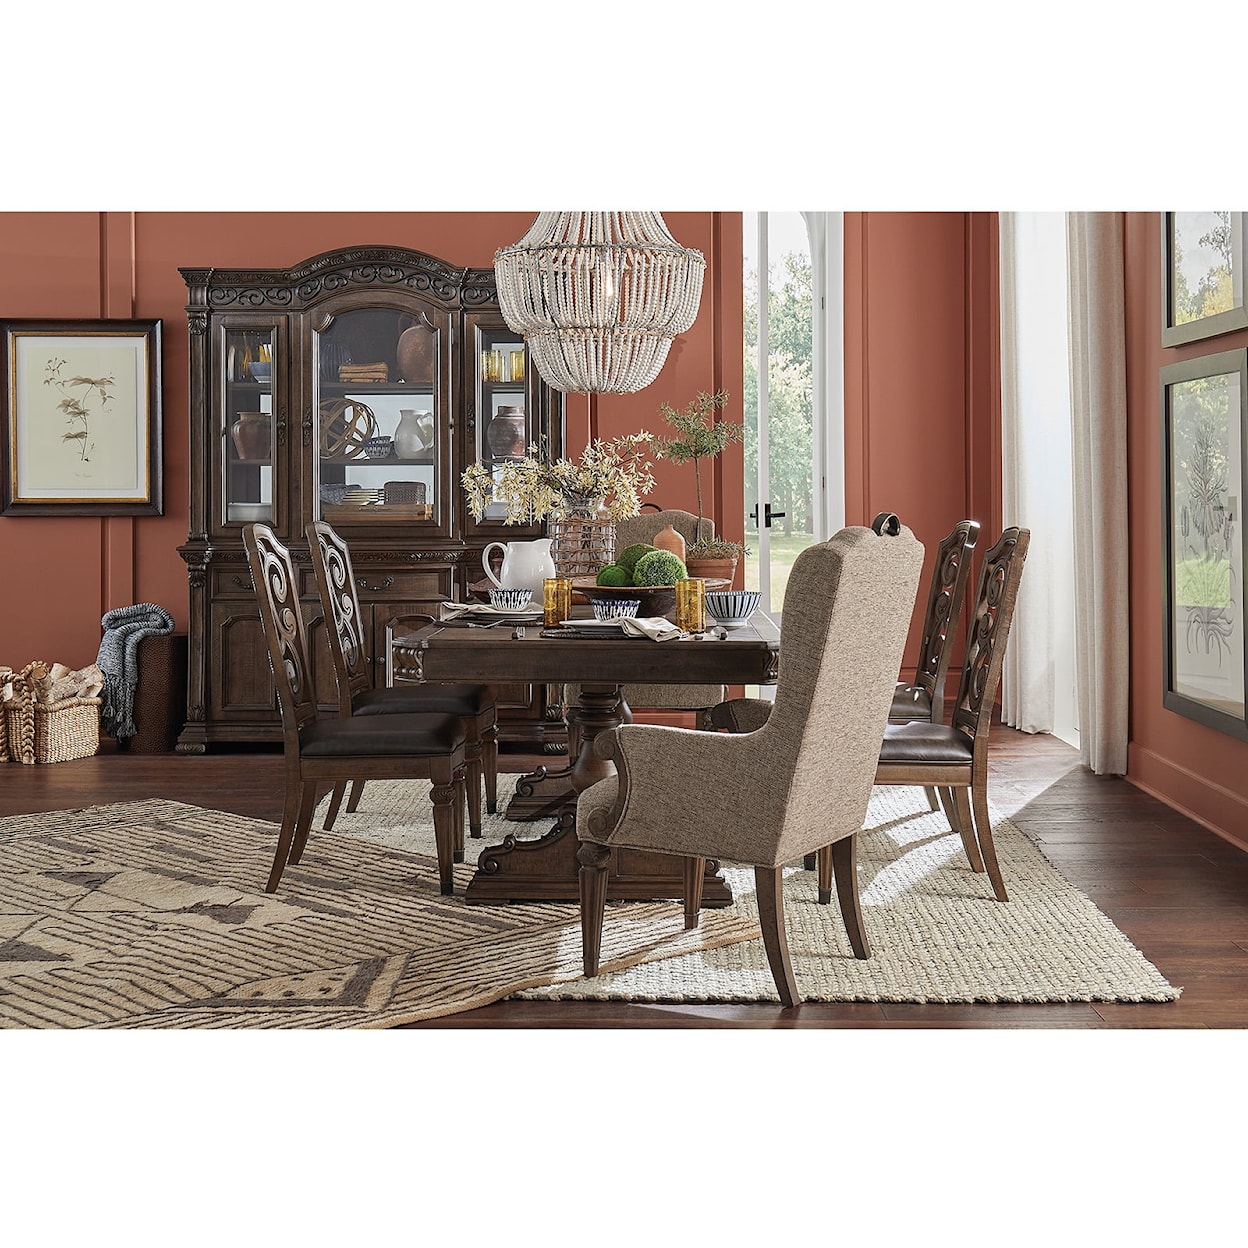 Magnussen Home Durango Dining Upholstered Host Arm Chair